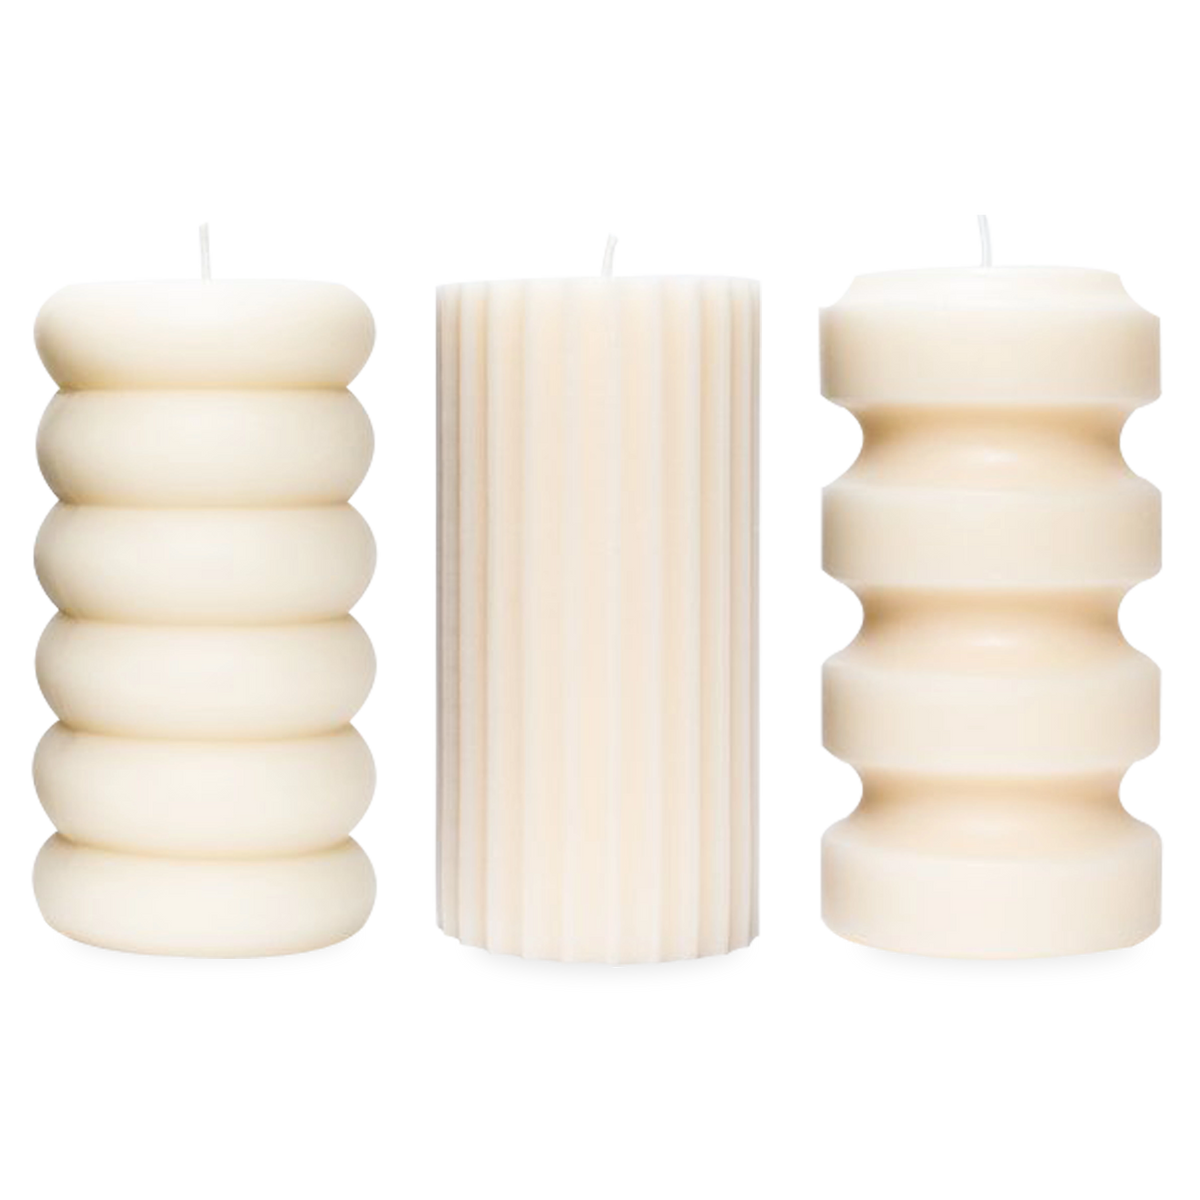 Characterized by its unique form, the mold of these candles were crafted by Canadian designers .